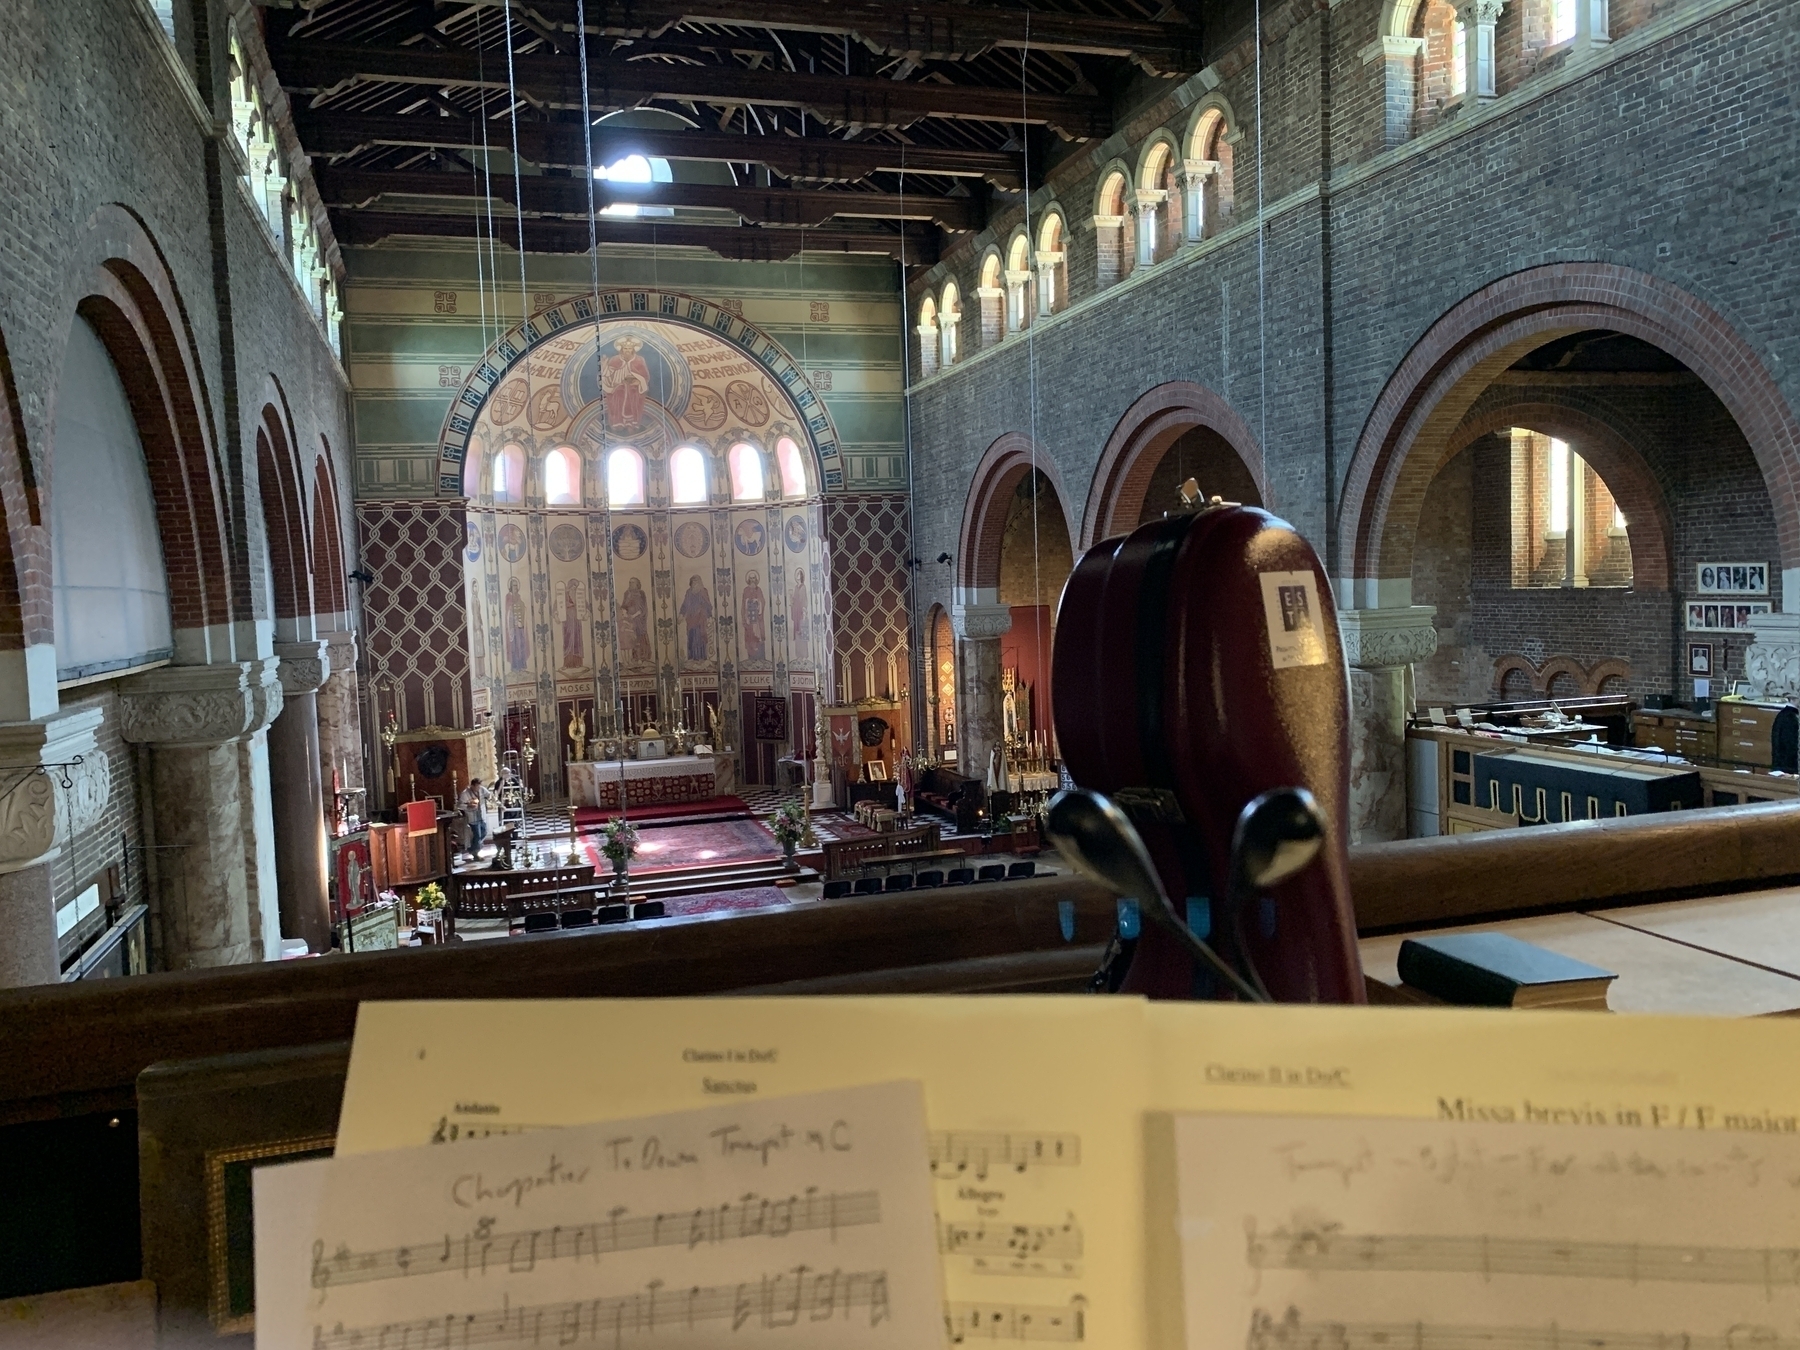 View from a balcony into a large church. The church has very high ceilings with the altar in an enclosed semi-circle at the end of the hall. In the foreground is some music and a cello case